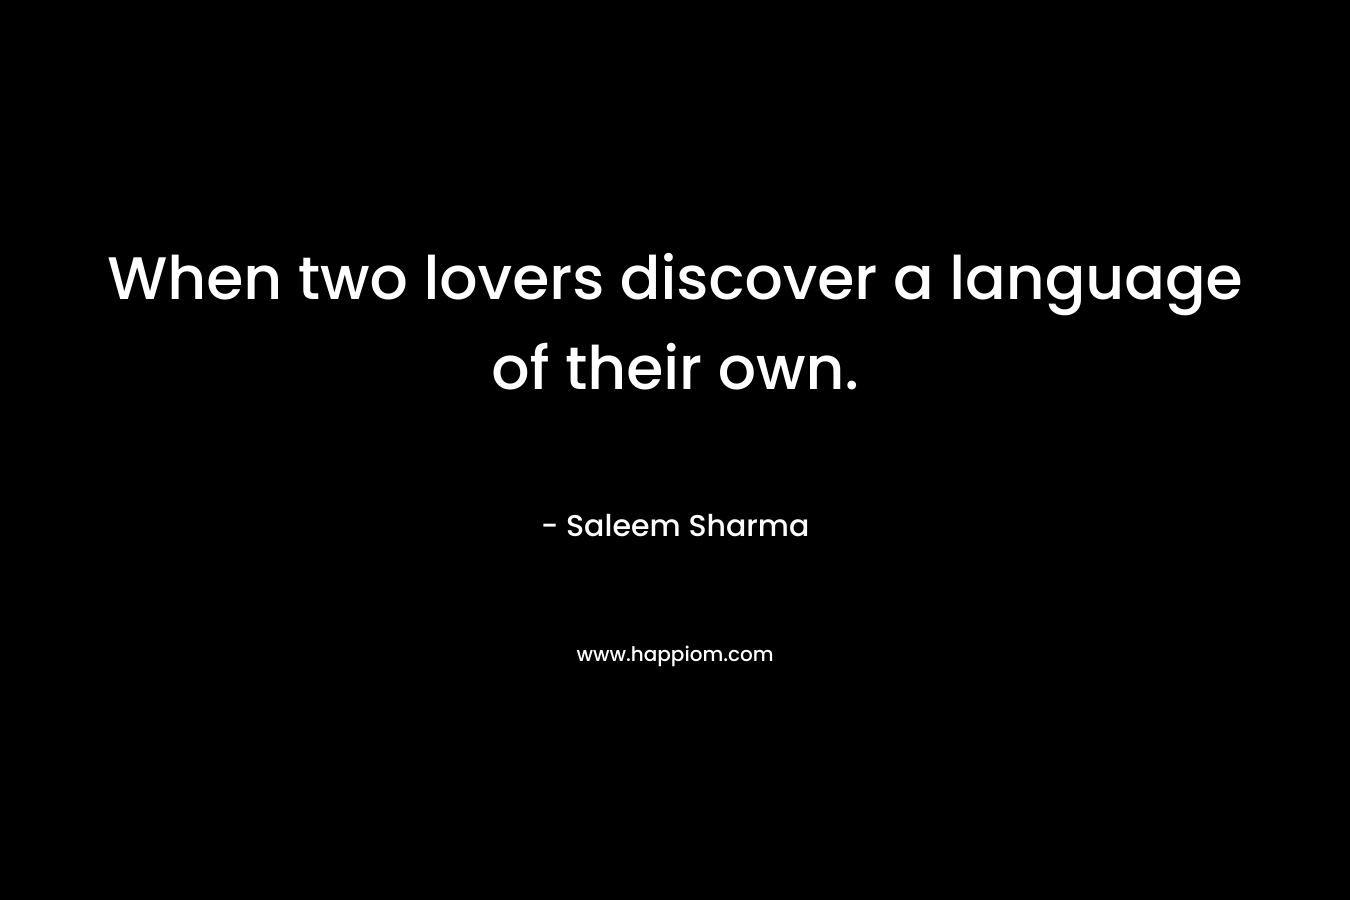 When two lovers discover a language of their own.